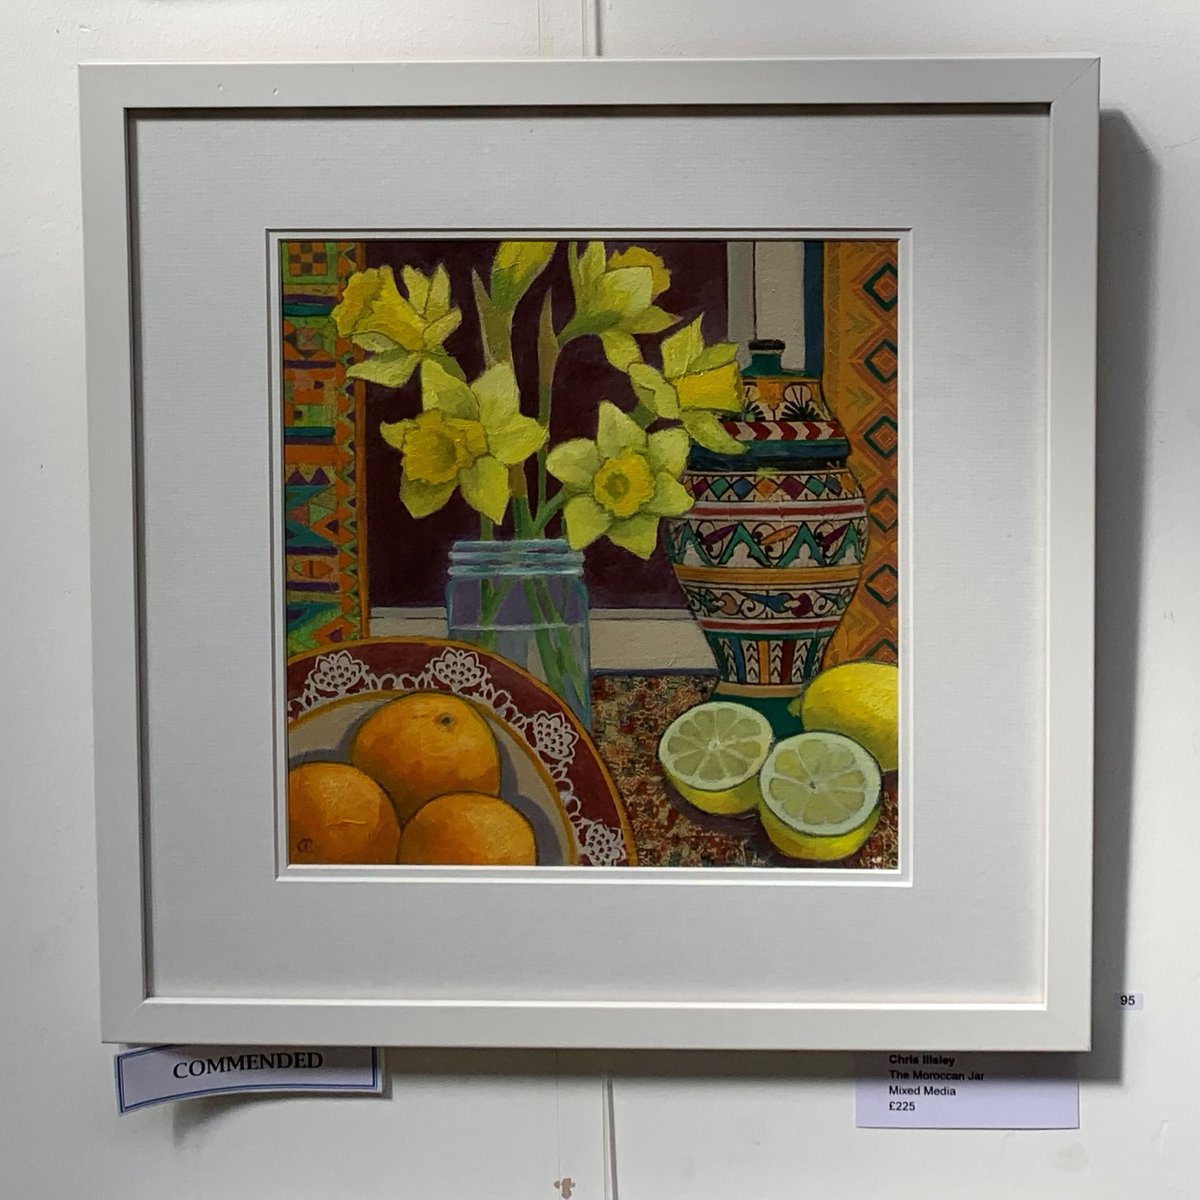 After exploring Stamford's Friday market why not pop into @stamfordarts and take a look at our wonderful spring exhibition? Fantastic work on show - including Chris Illsley's beautiful painting 'The Moroccan Jar', which was commended by our visiting judge #stamforduk #art